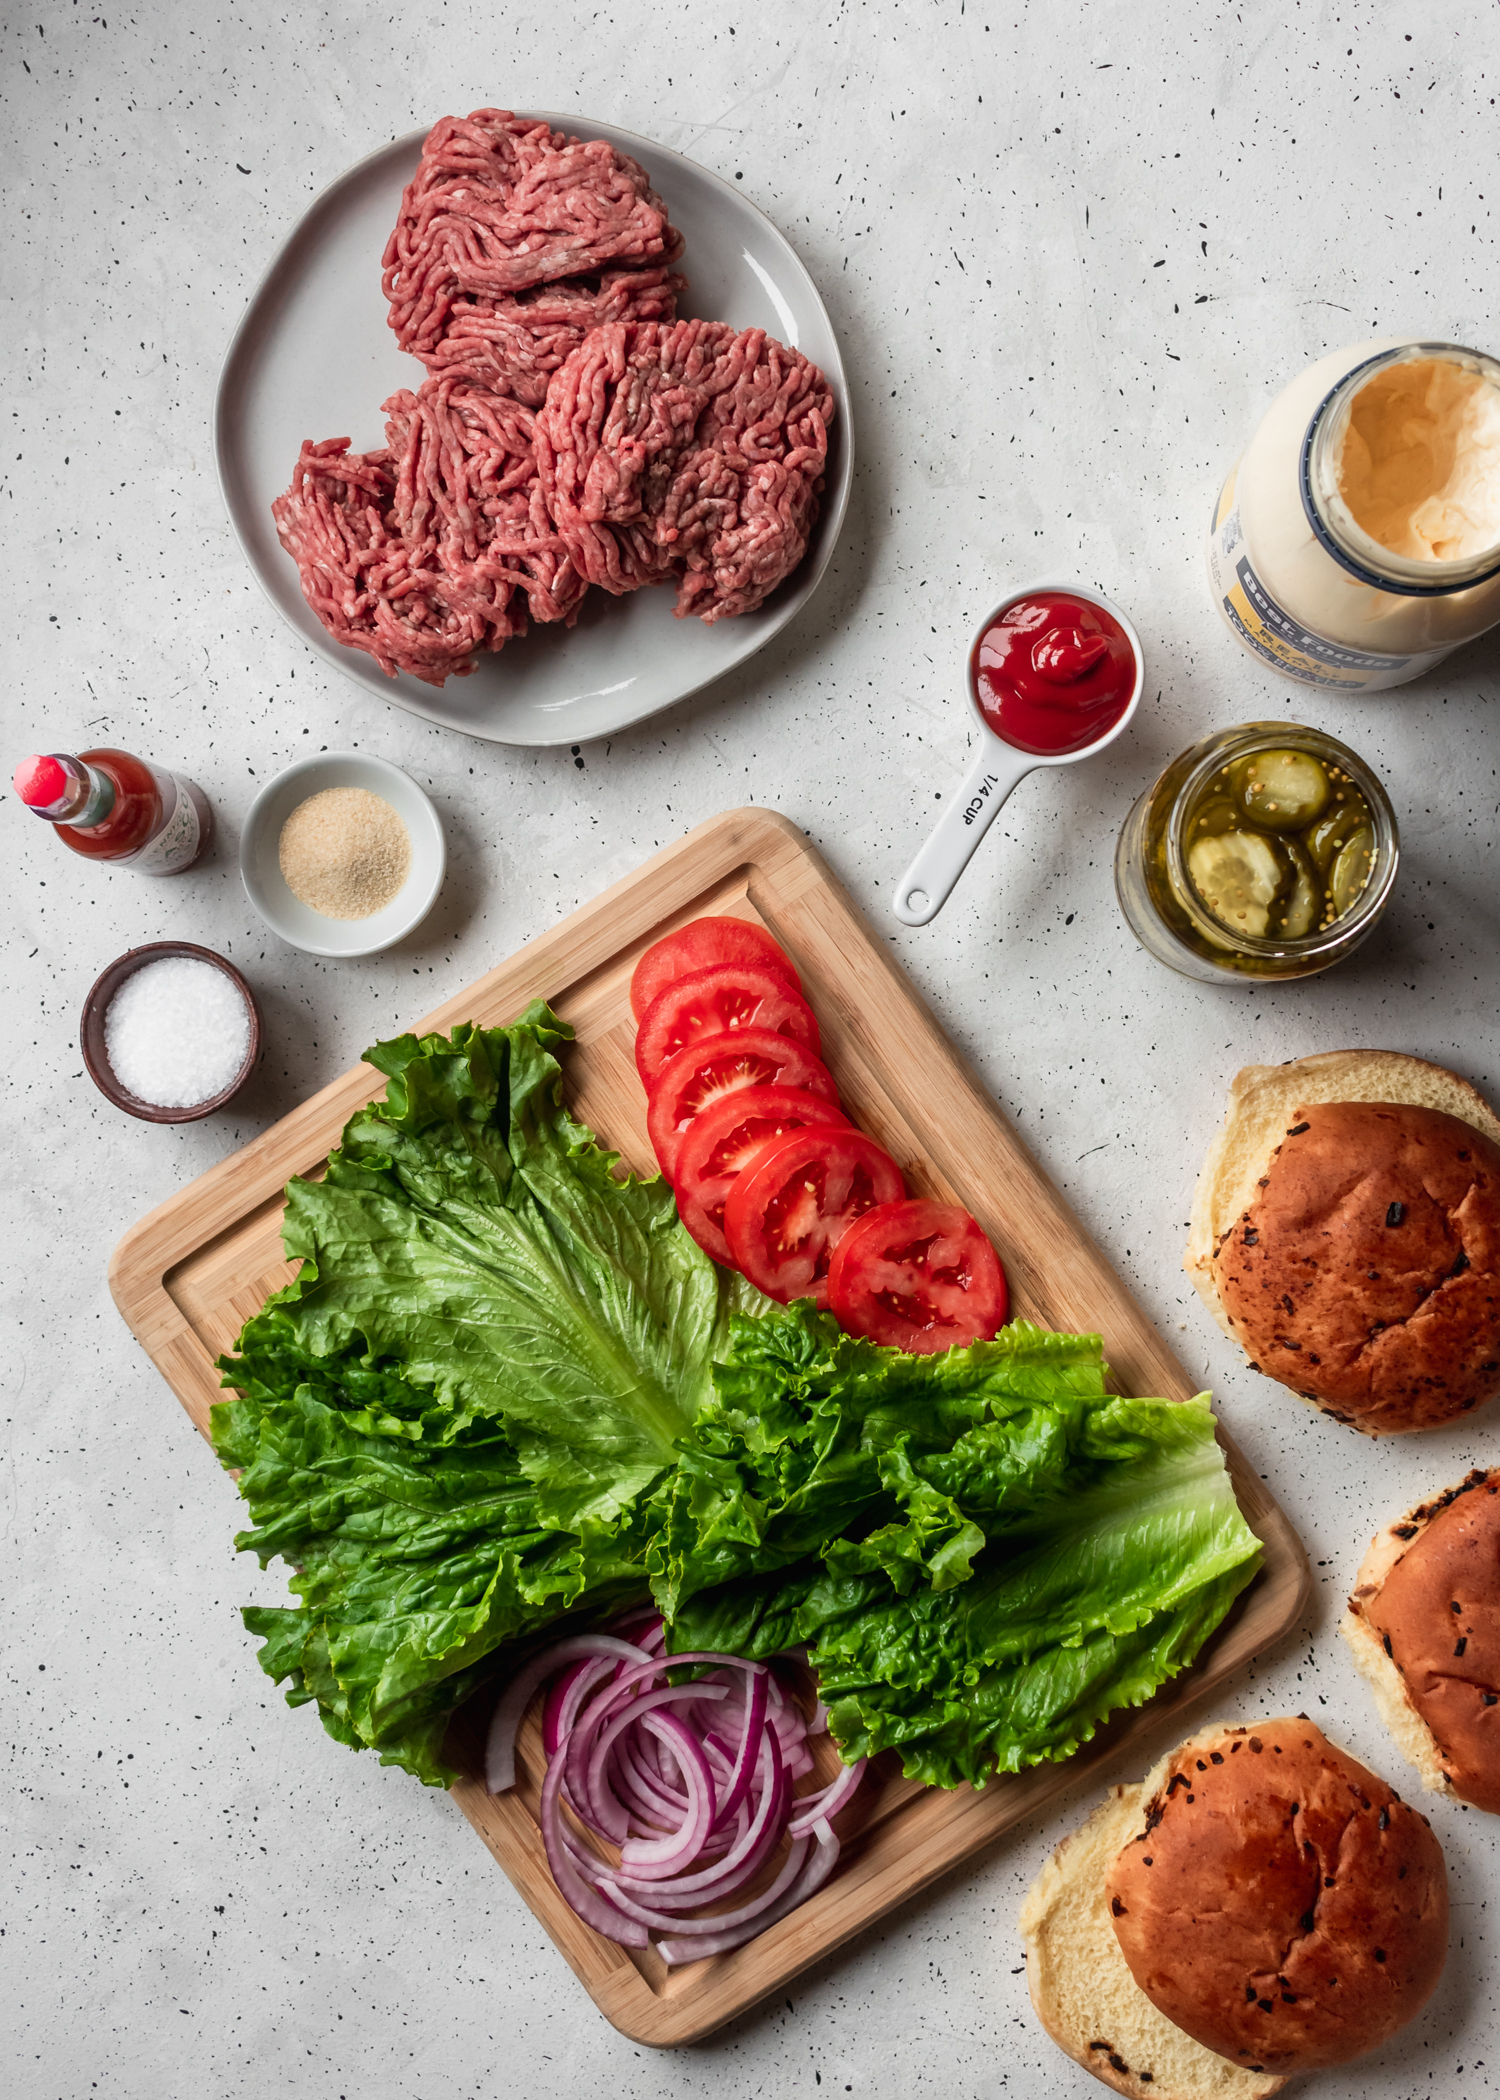 An overhead image of a wood board with veggies, a white plate of ground beef, buns, pickles, and condiments on a white speckled counter.